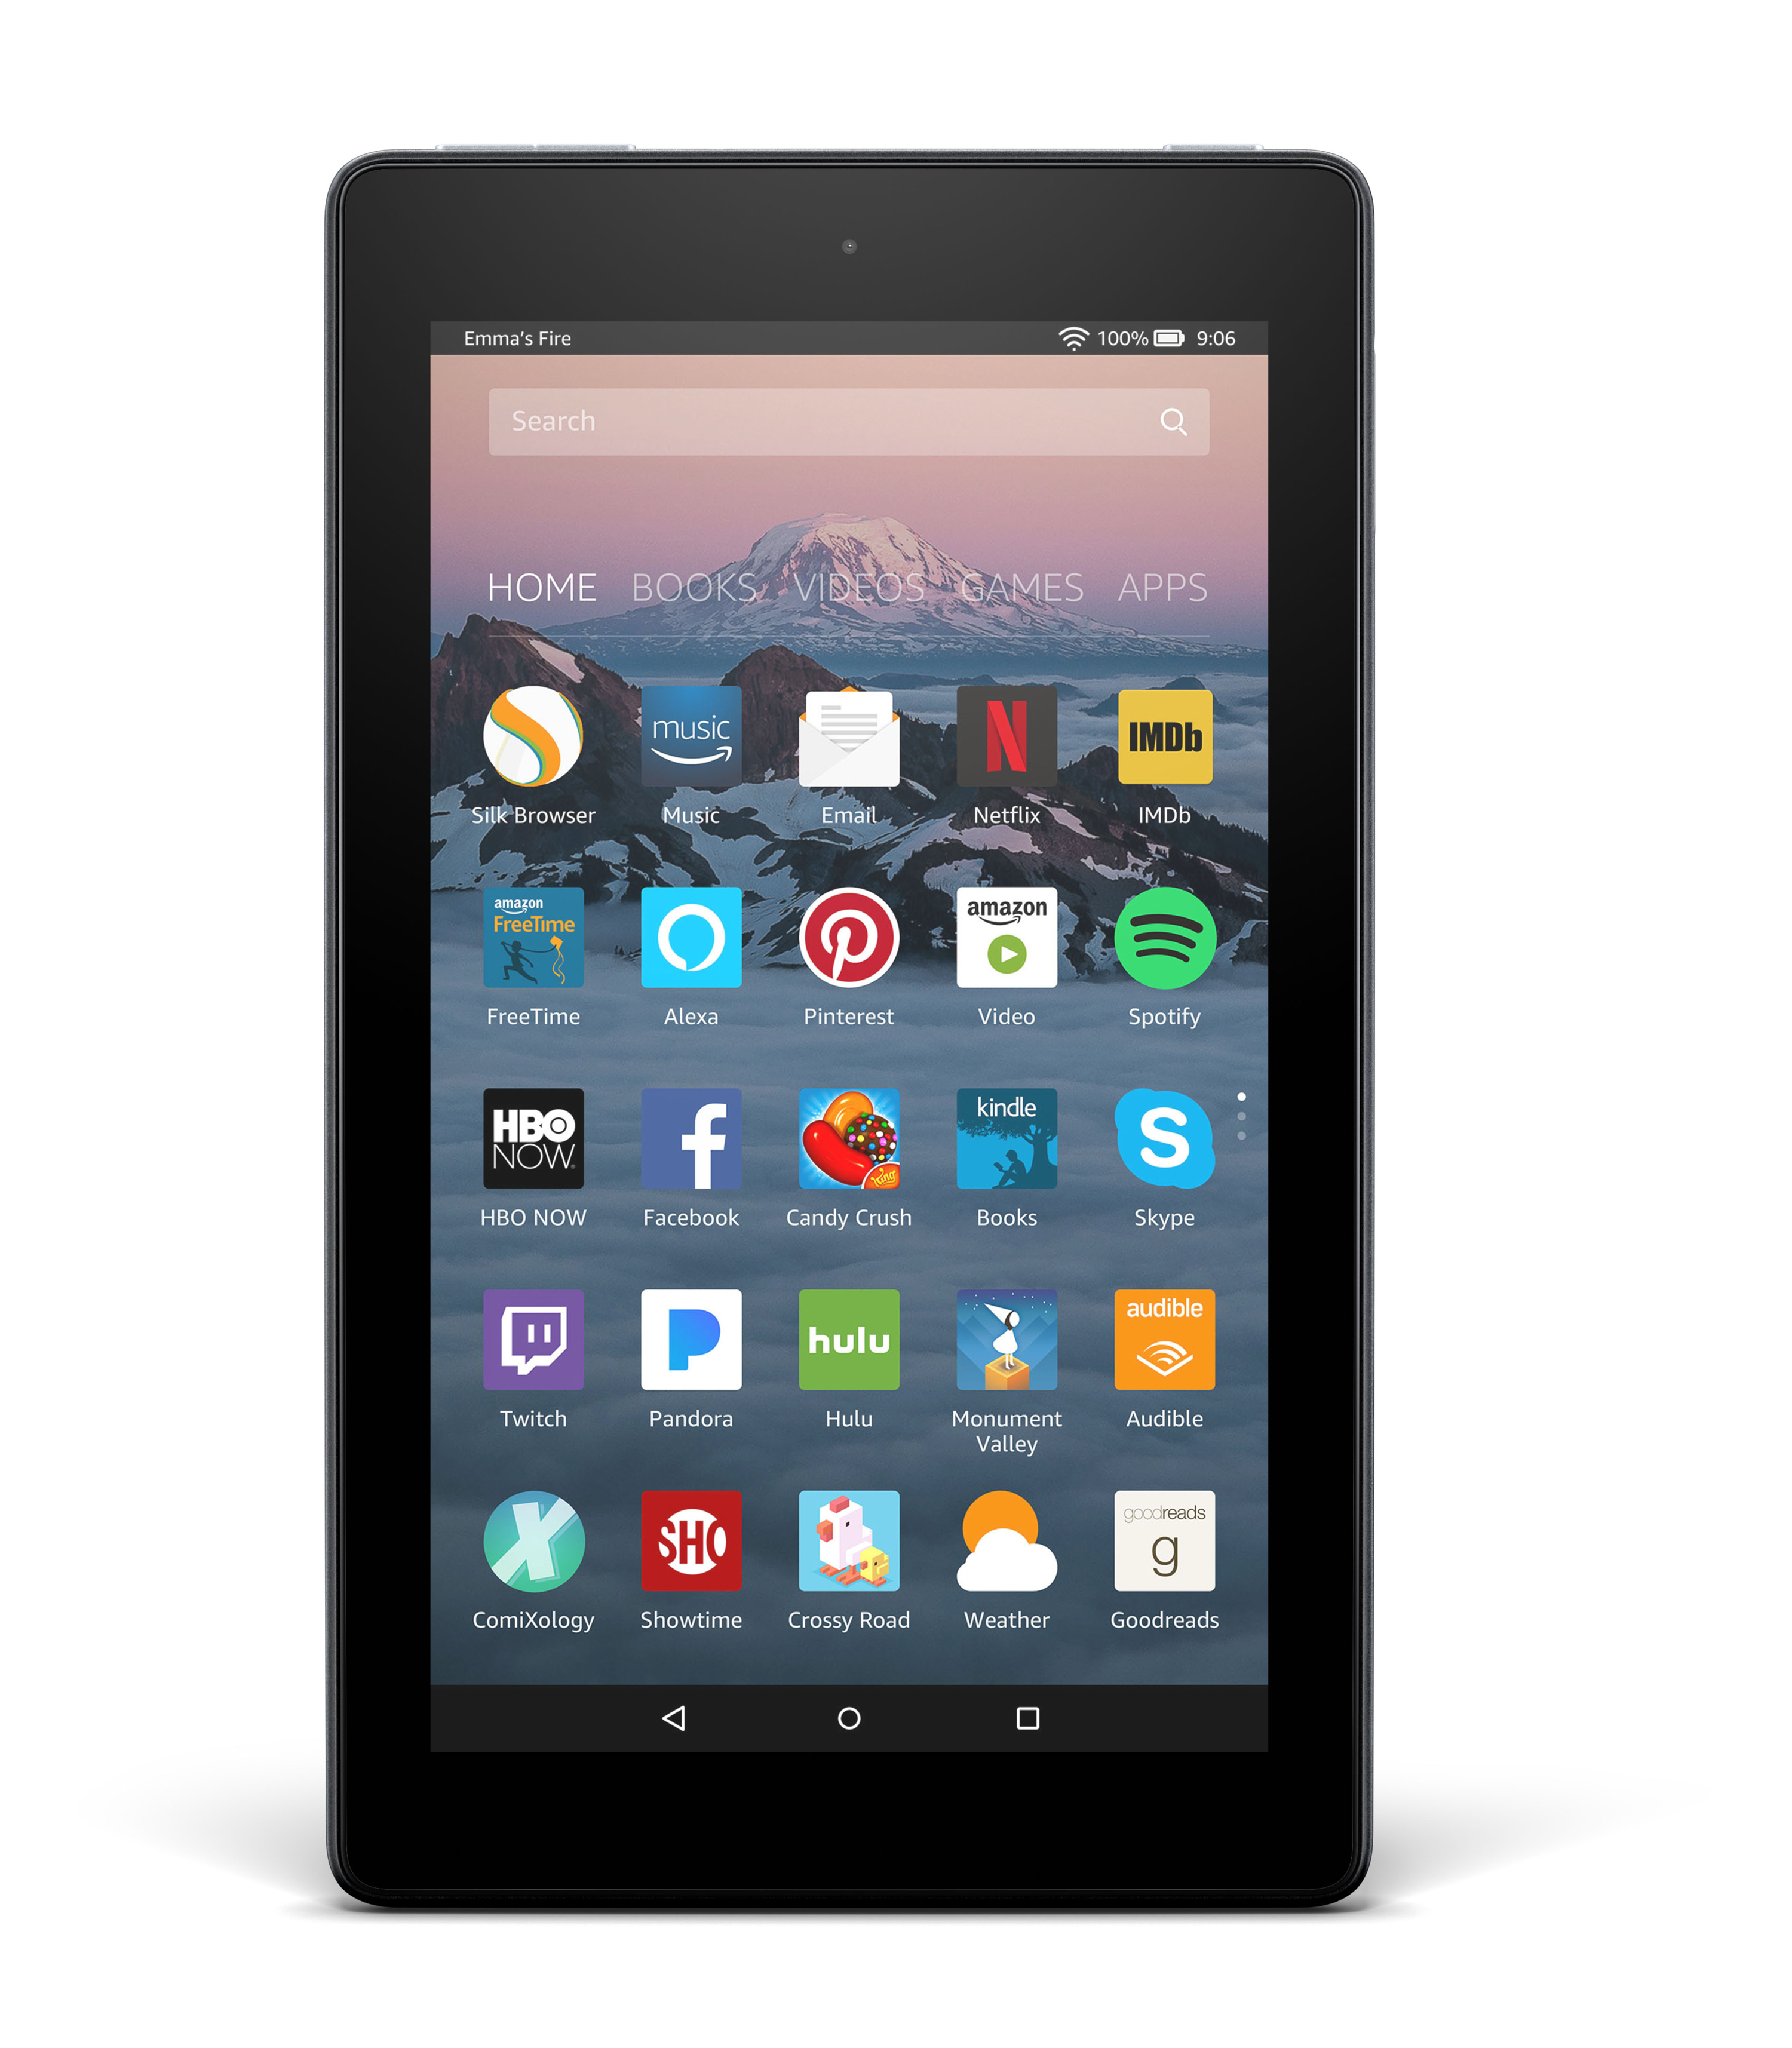 Amazon Fire 7 Tablet with Alexa, 16GB (Special Offers)